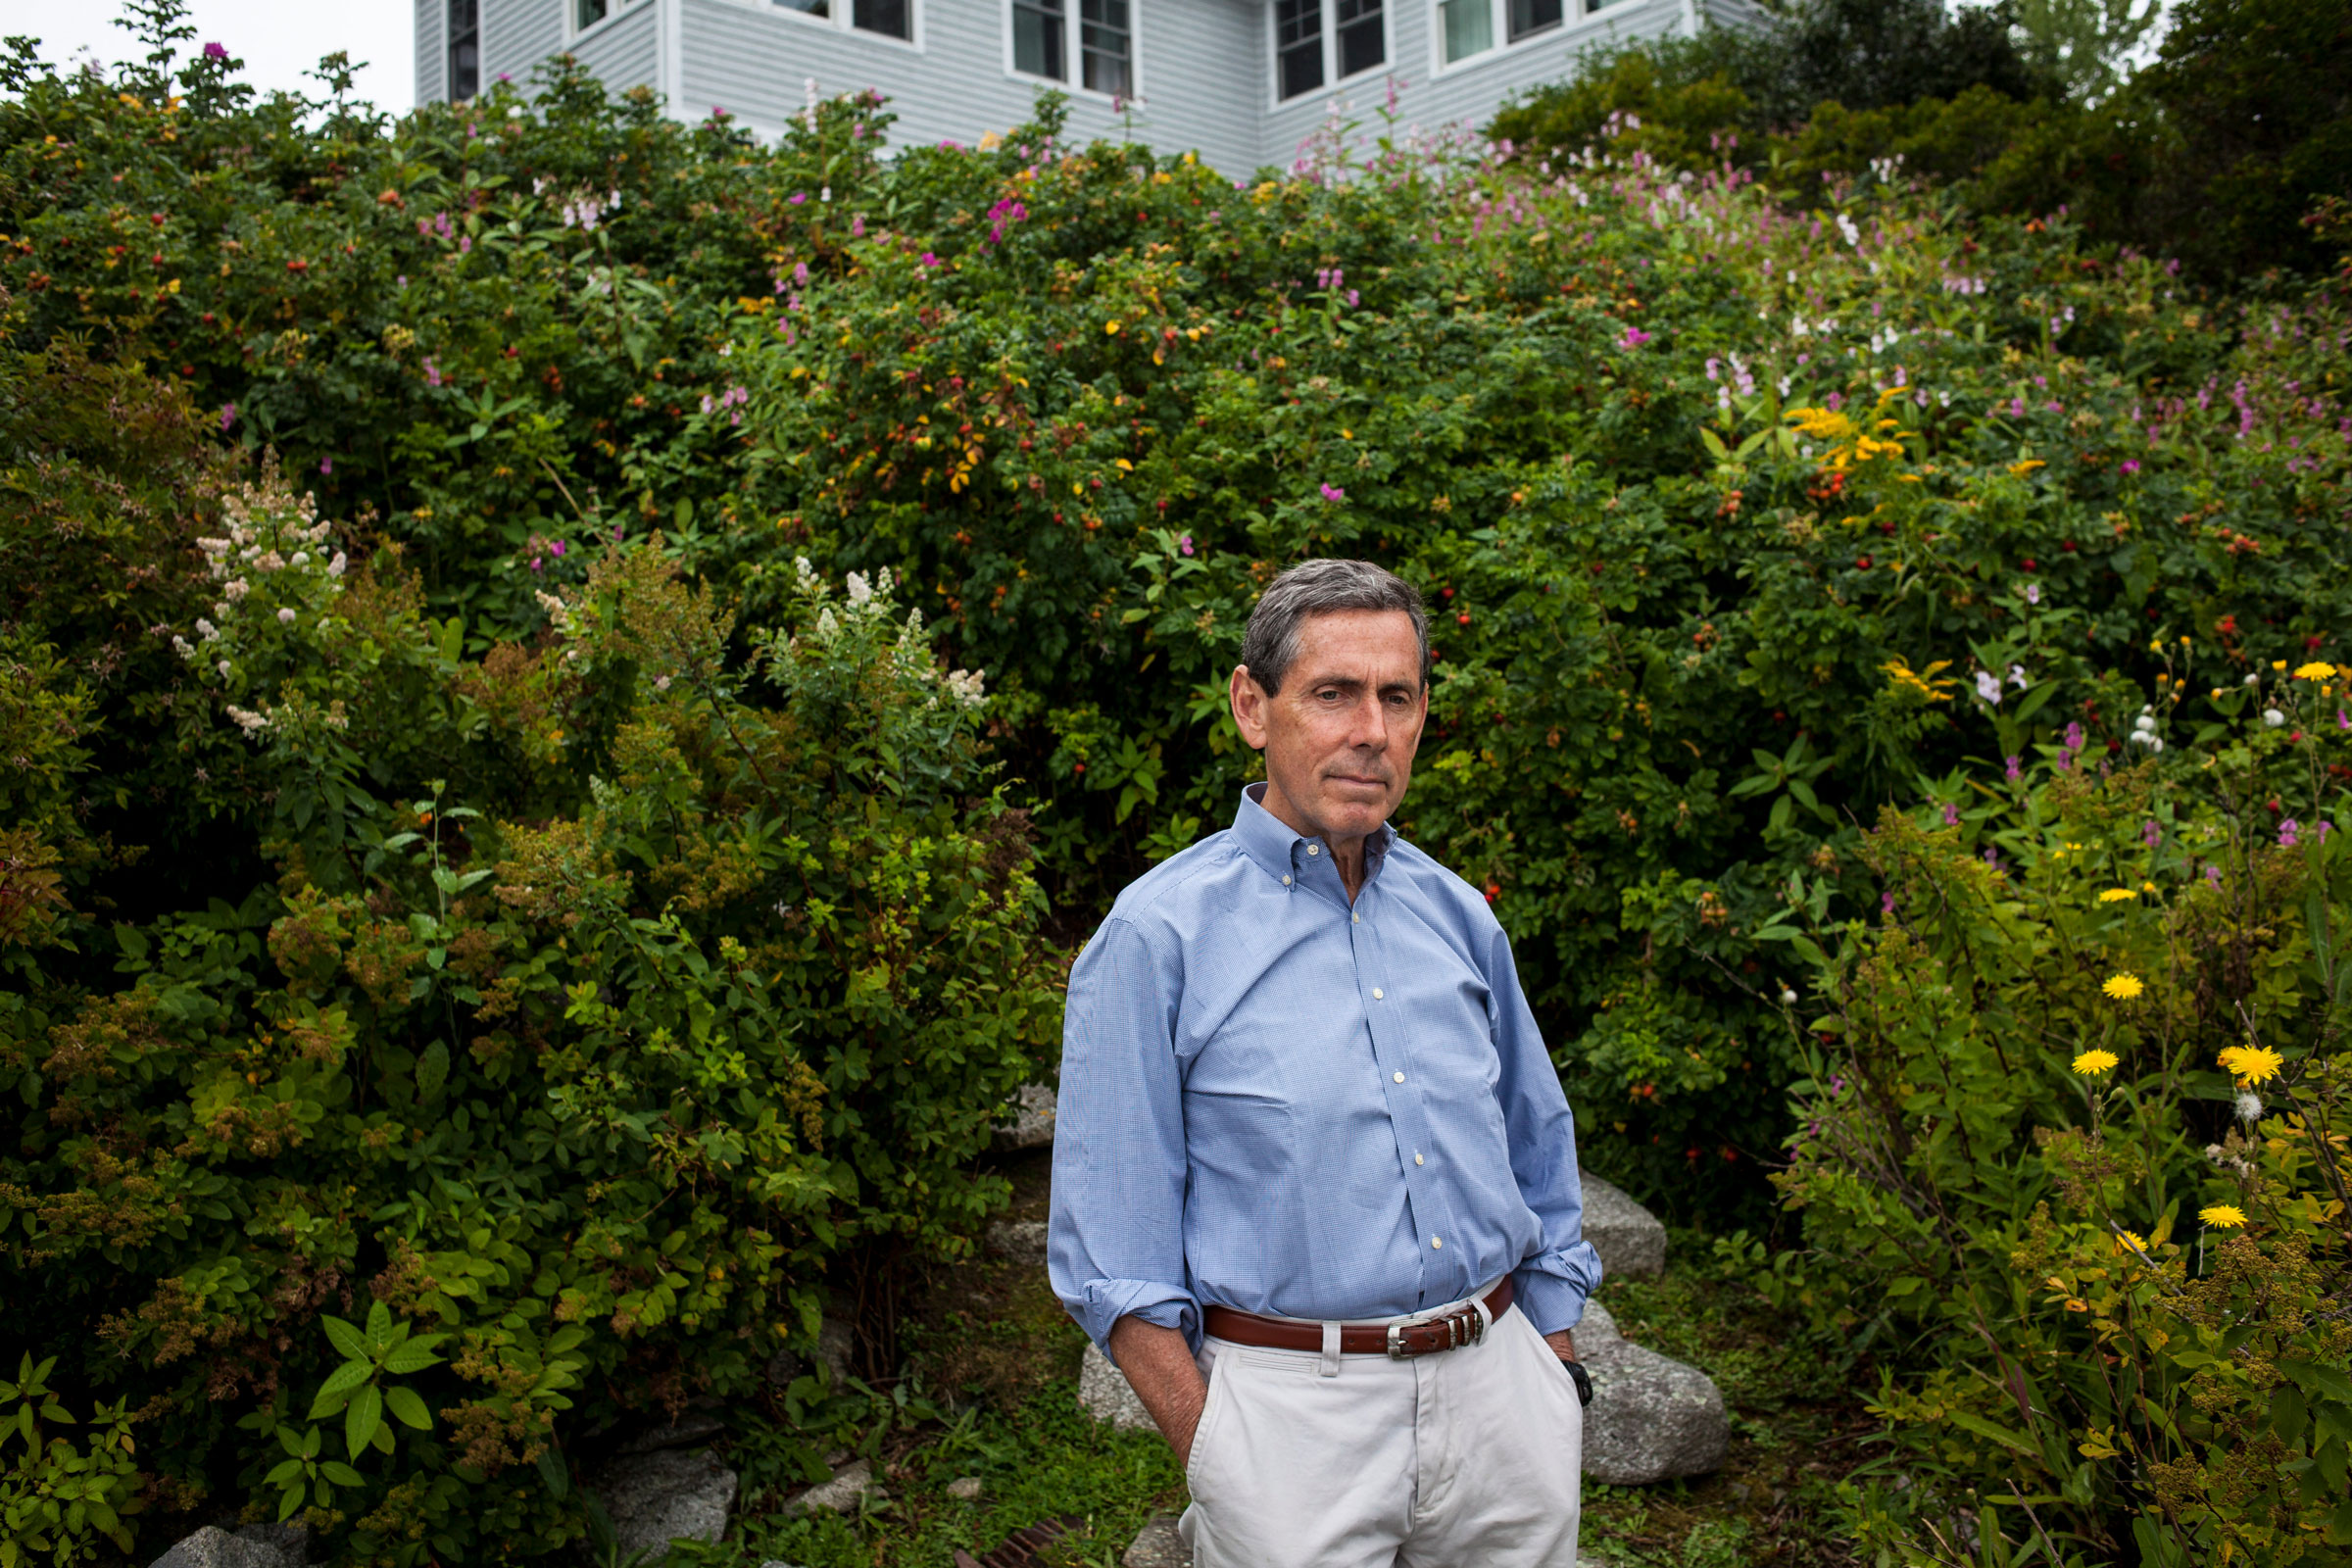 Edward Blum, who has waged a years-long legal campaign against affirmative action policies, at his home in South Thomaston, Maine